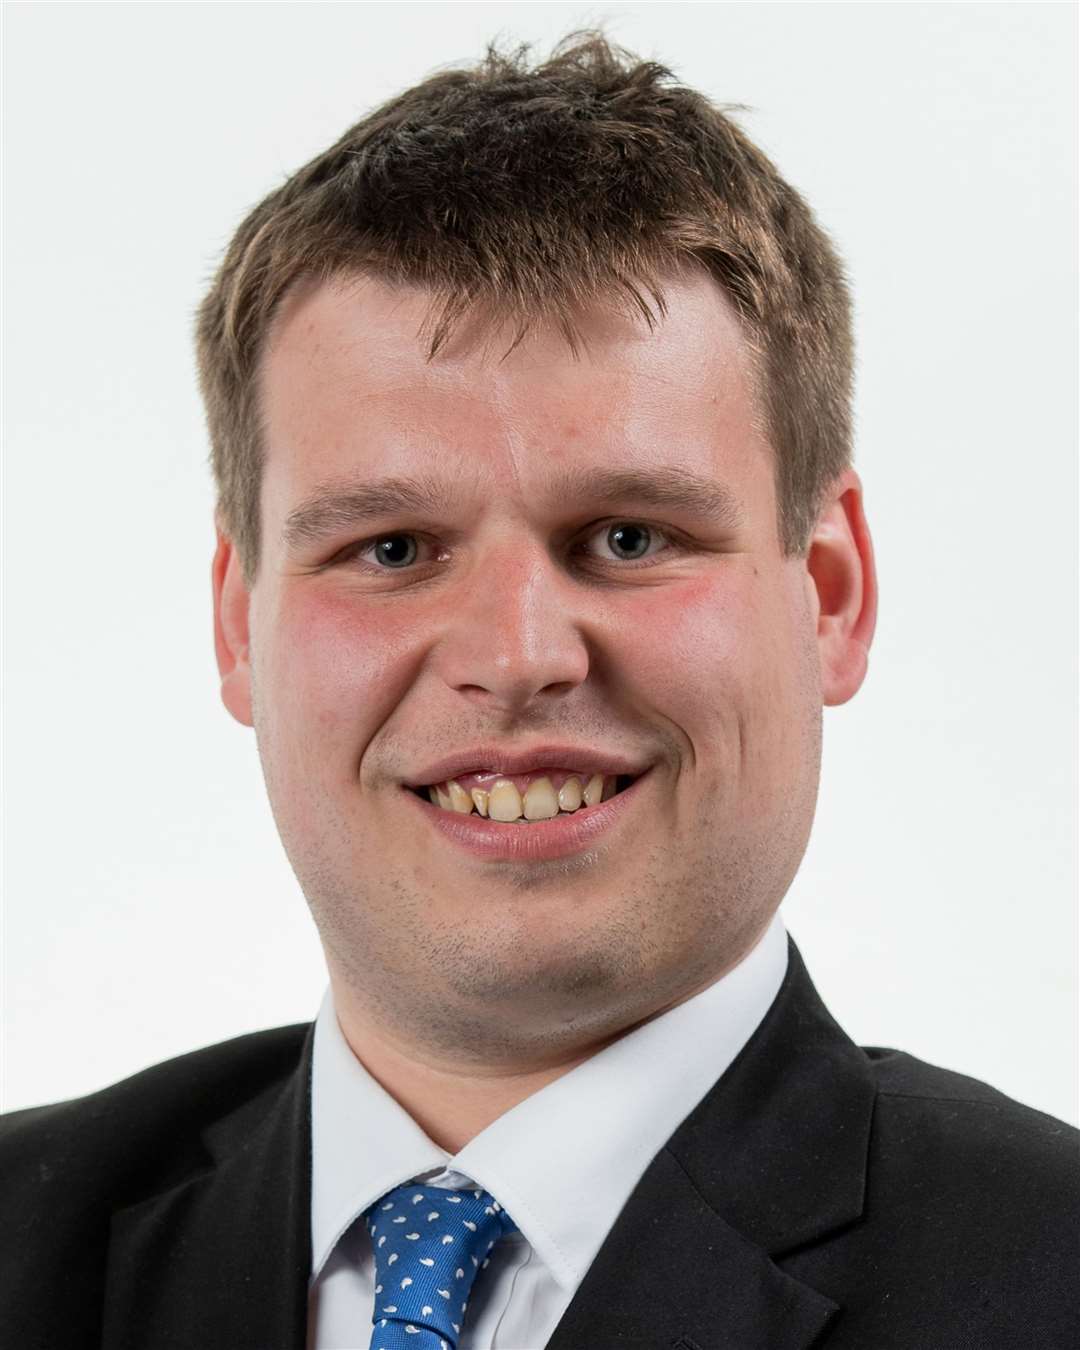 Cllr Matt Boughton continues as leader of the council